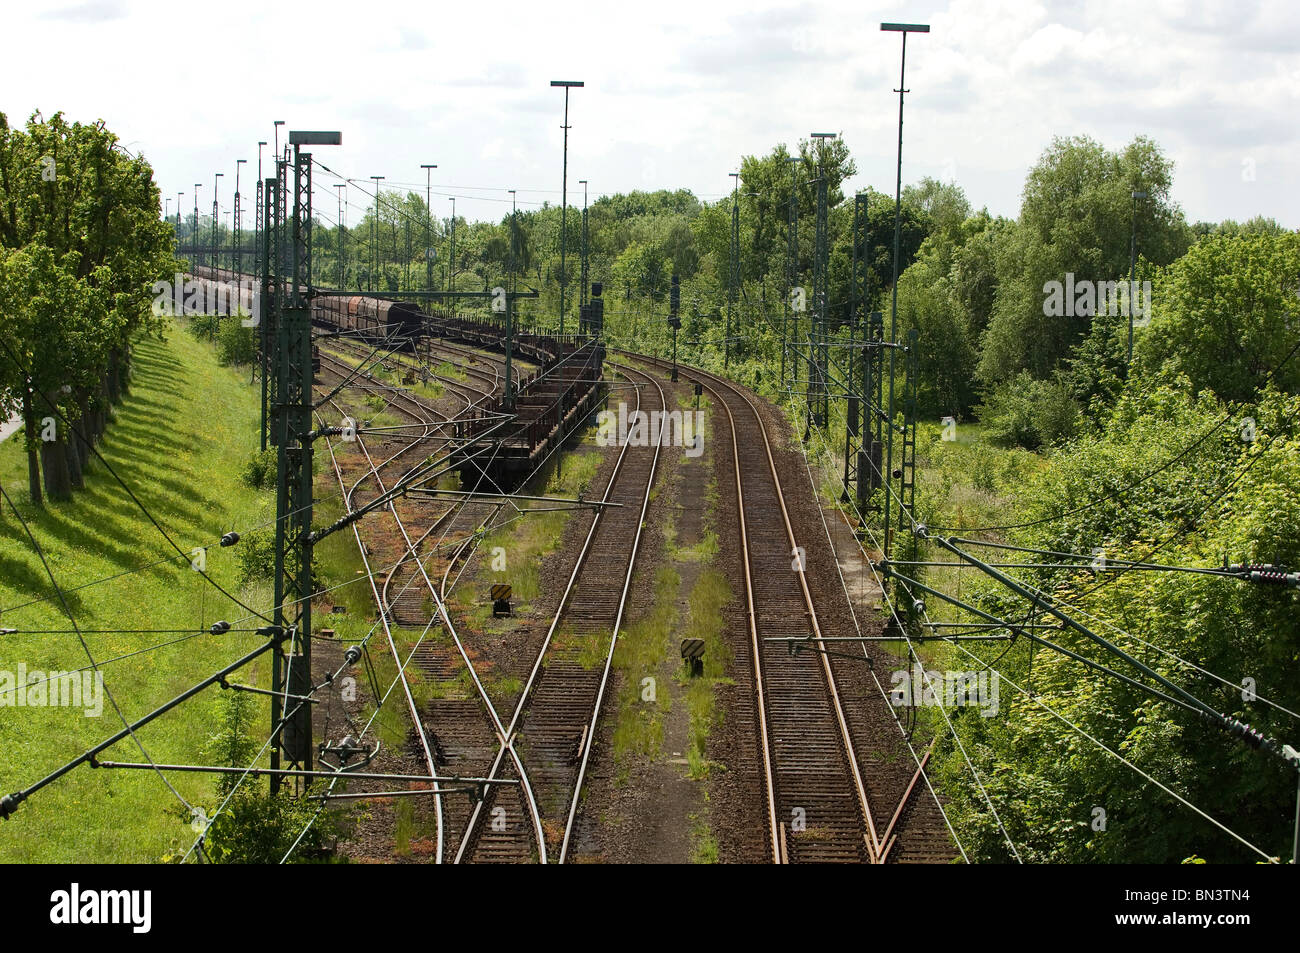 High angle view of freight trains on tracks Stock Photo